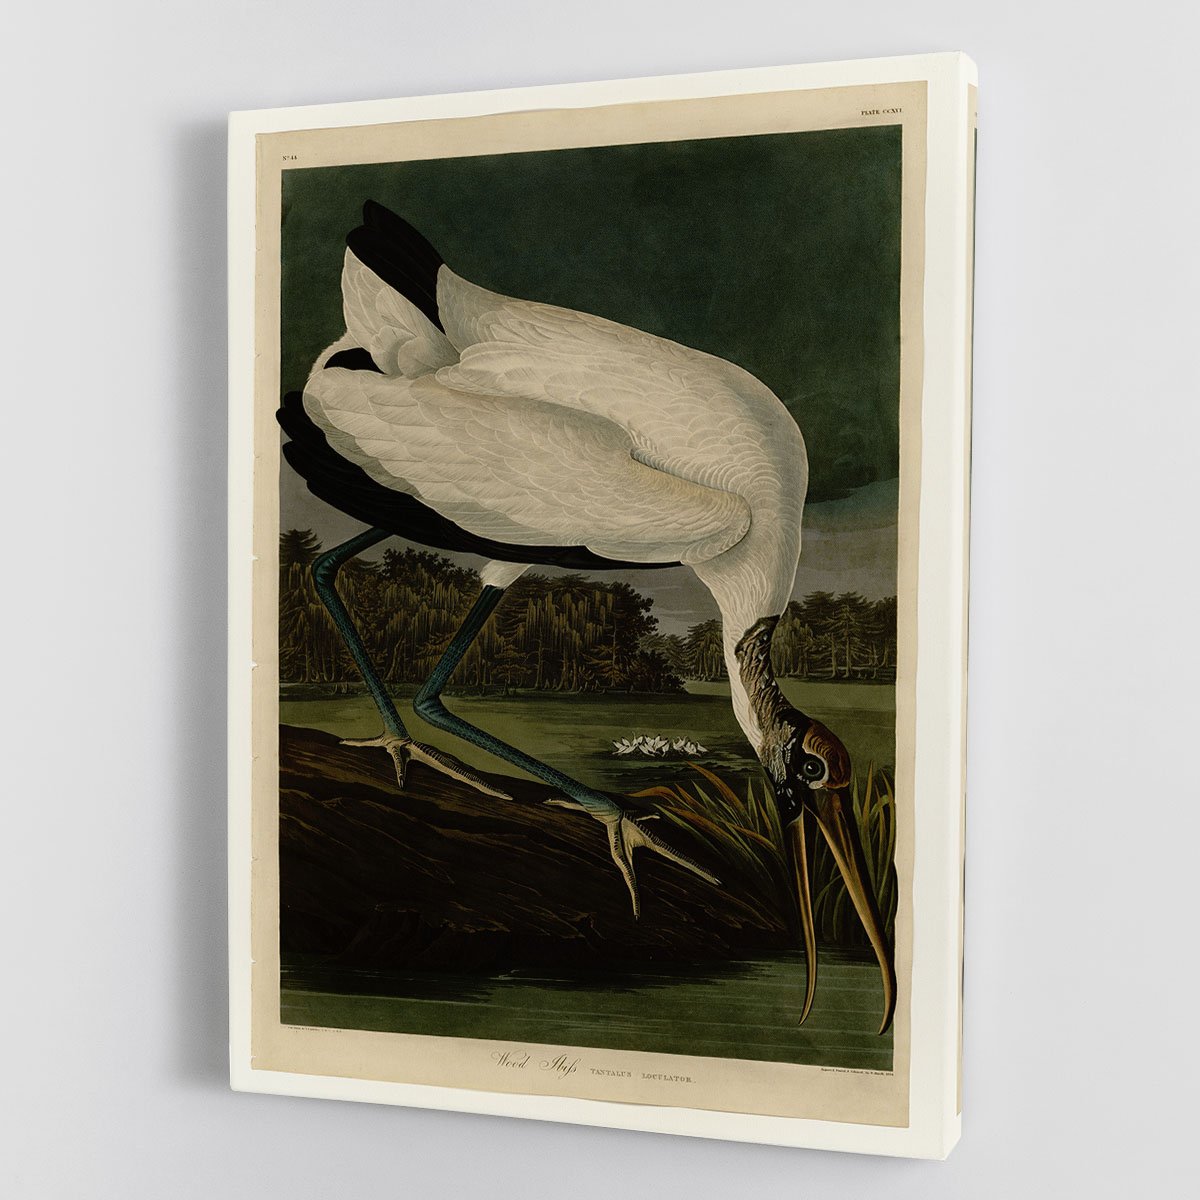 Wood Ibiss by Audubon Canvas Print or Poster